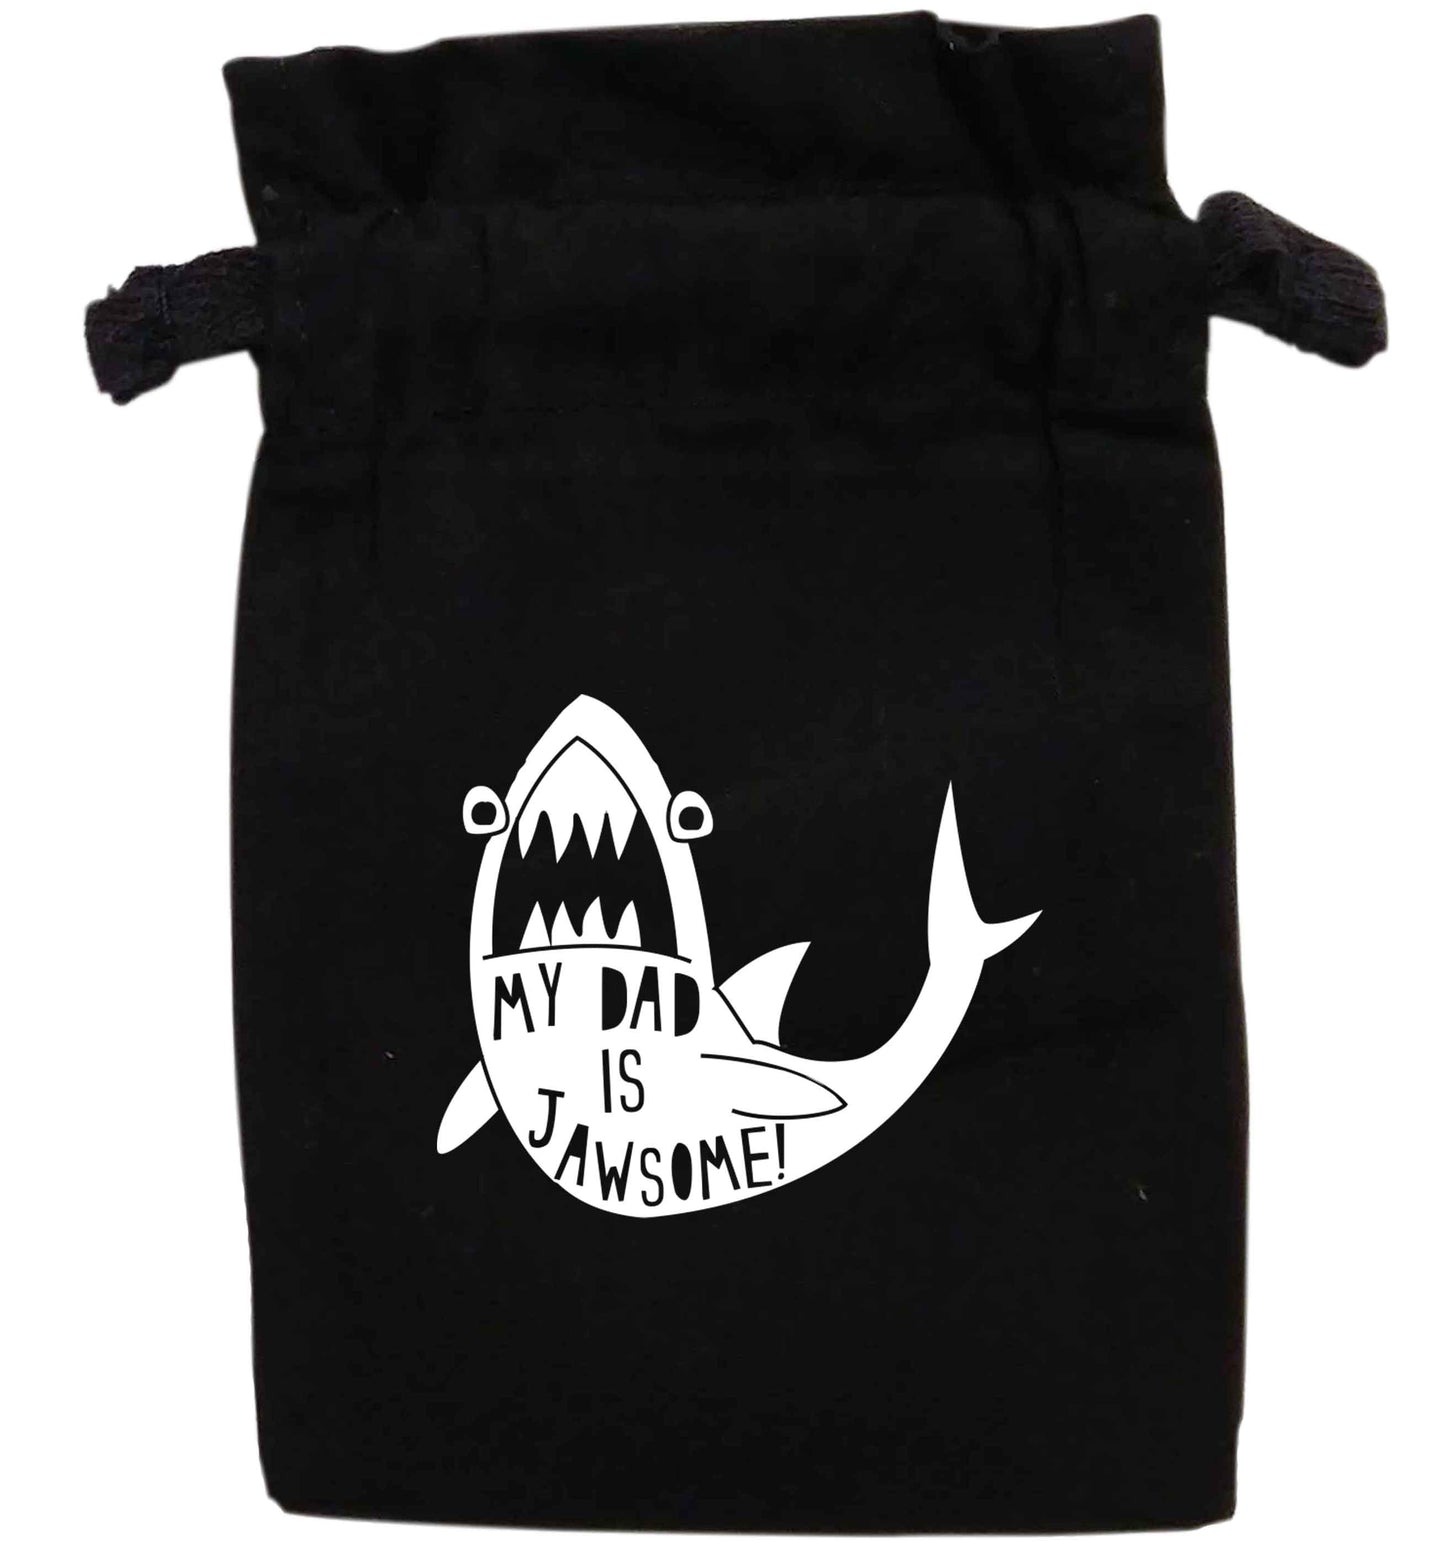 My Dad is jawsome | XS - L | Pouch / Drawstring bag / Sack | Organic Cotton | Bulk discounts available!